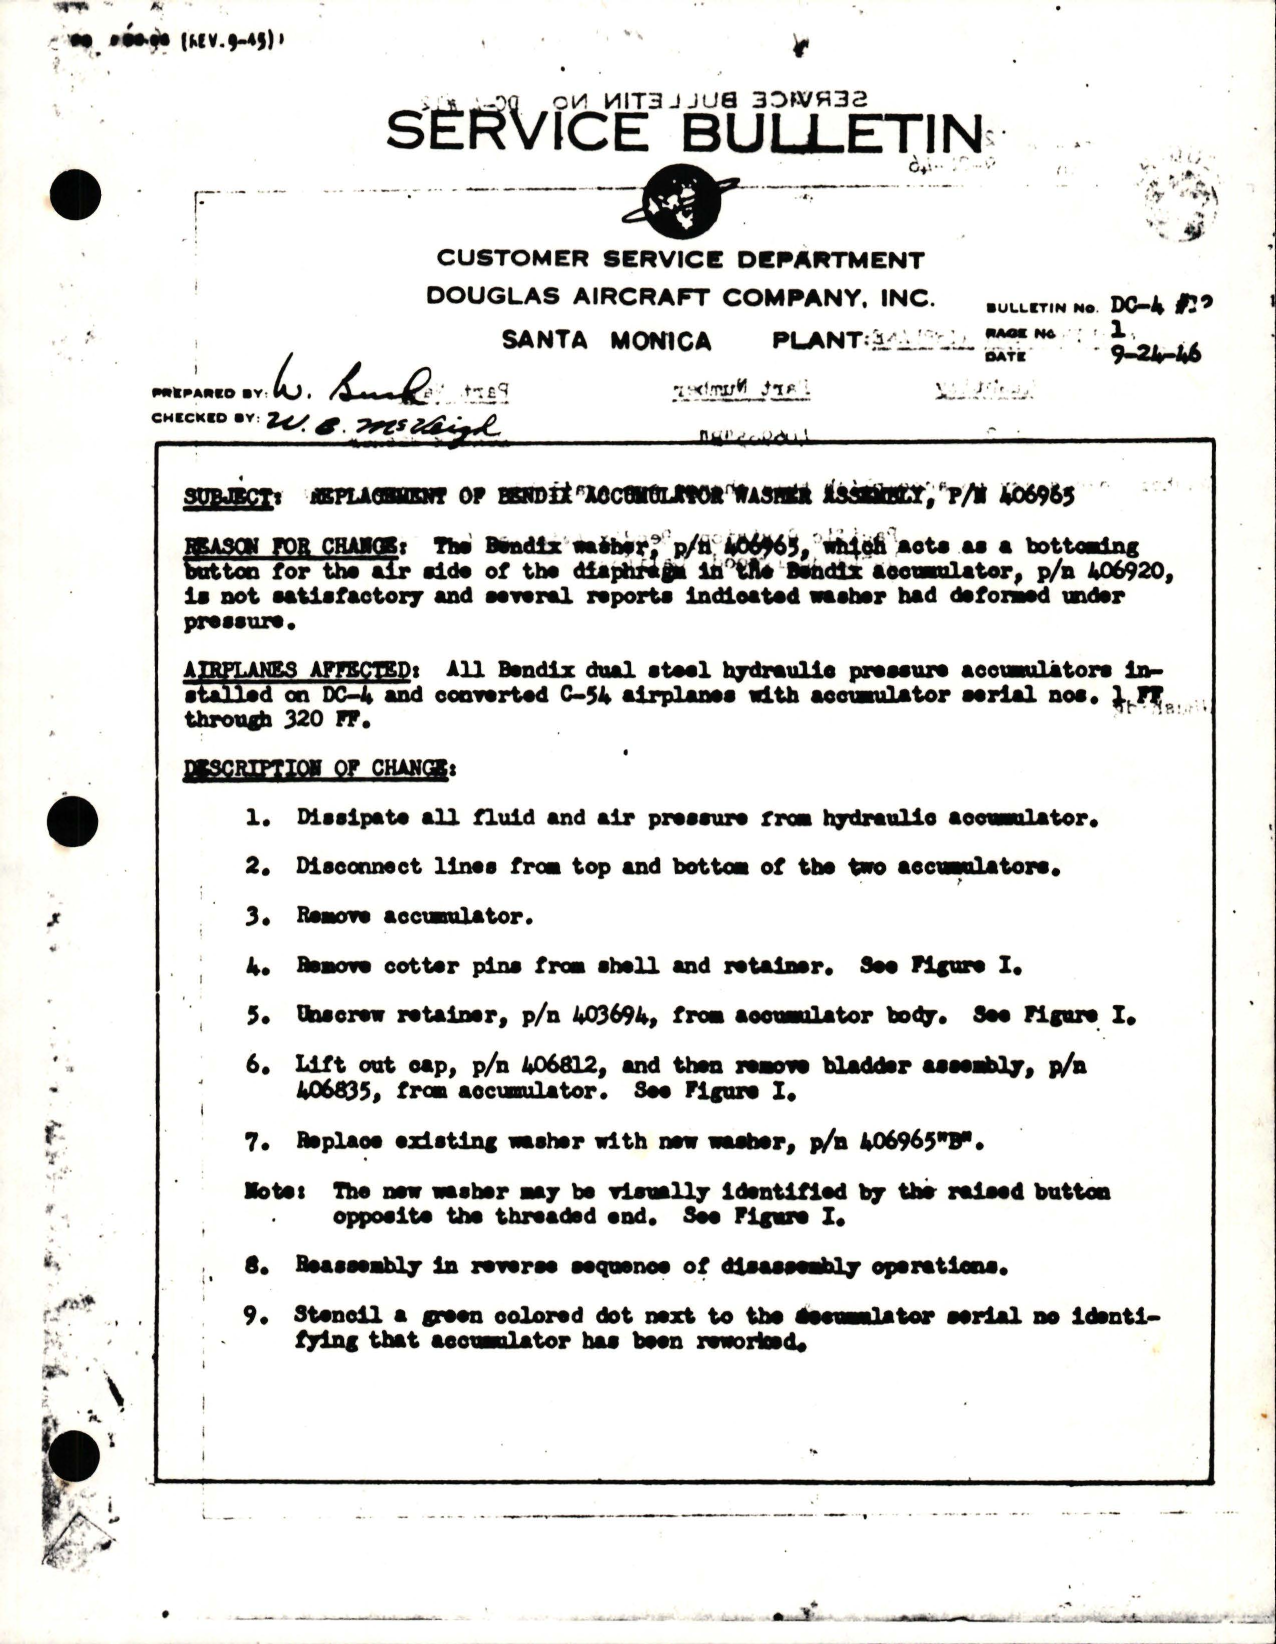 Sample page 1 from AirCorps Library document: Replacement of Bendix Accumulator Washer Assembly - Part 406965